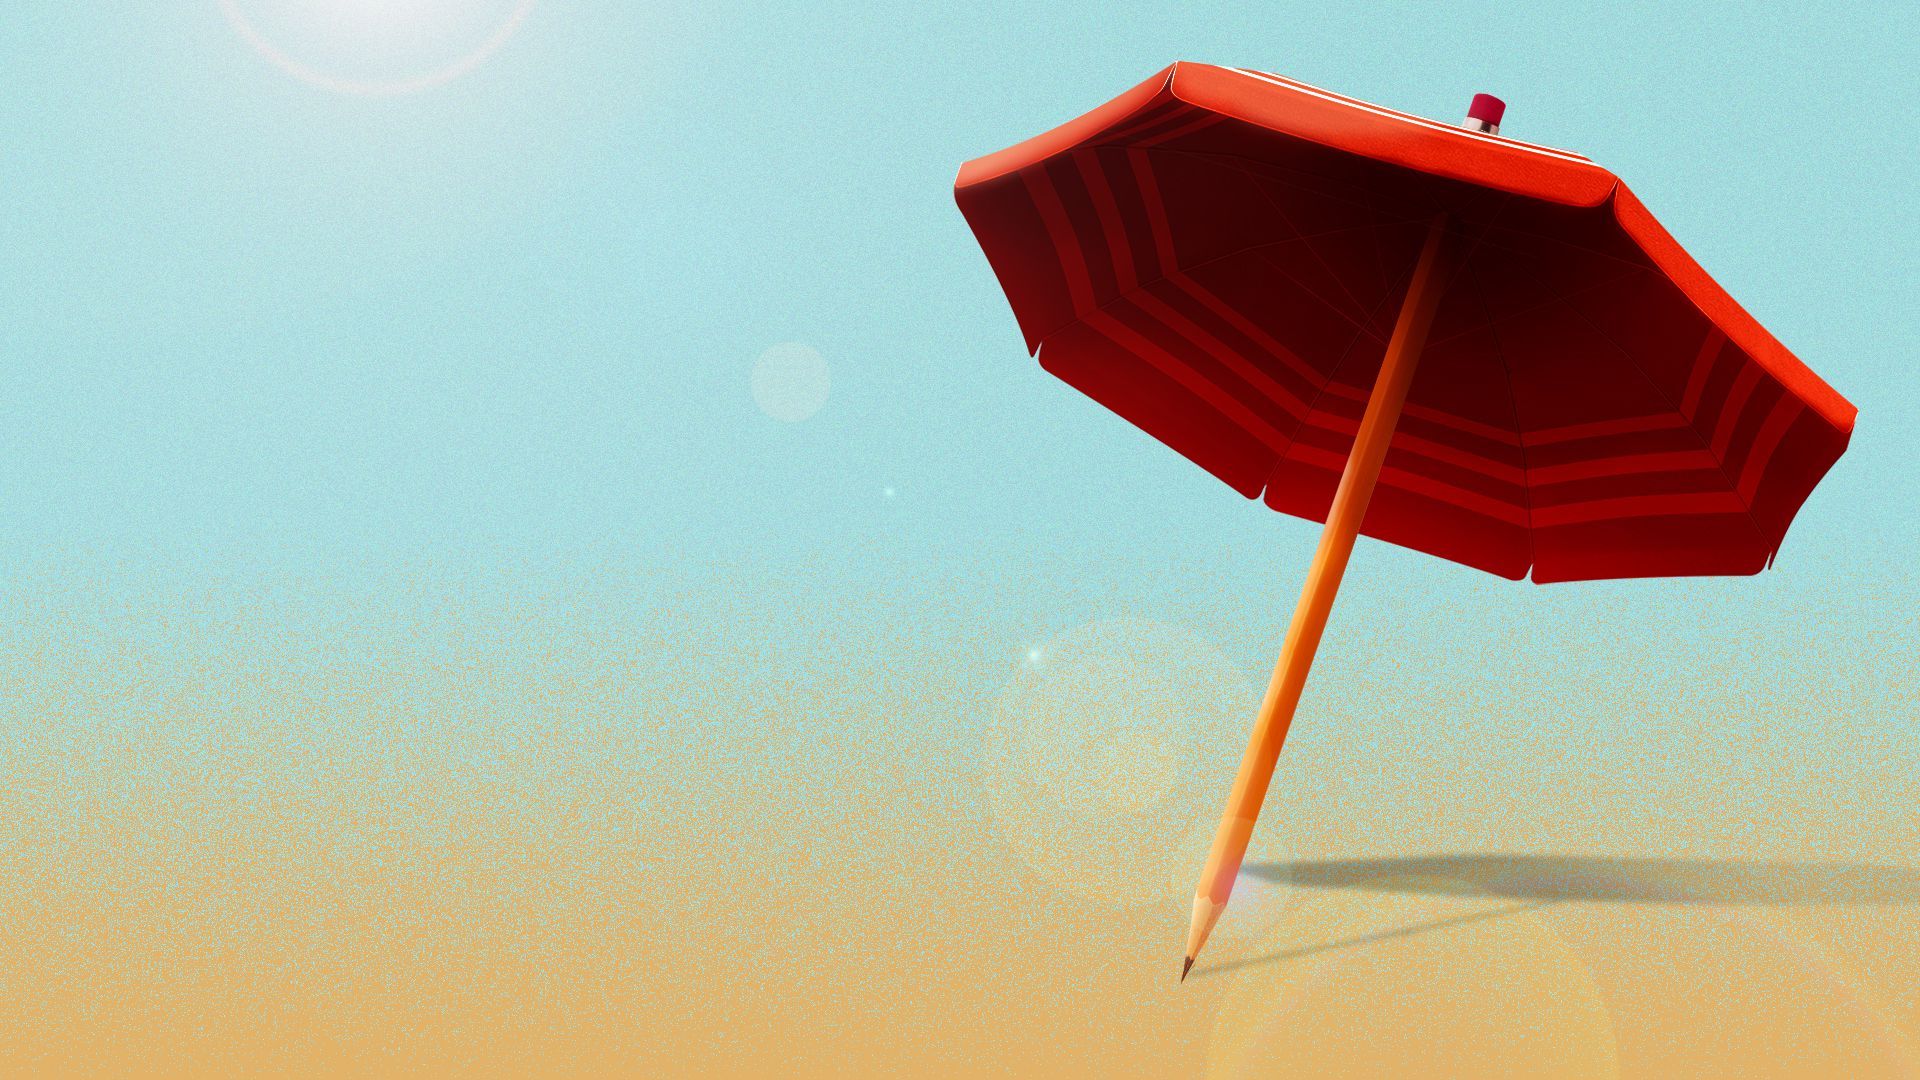 Illustration of a beach umbrella with a pencil for the handle.